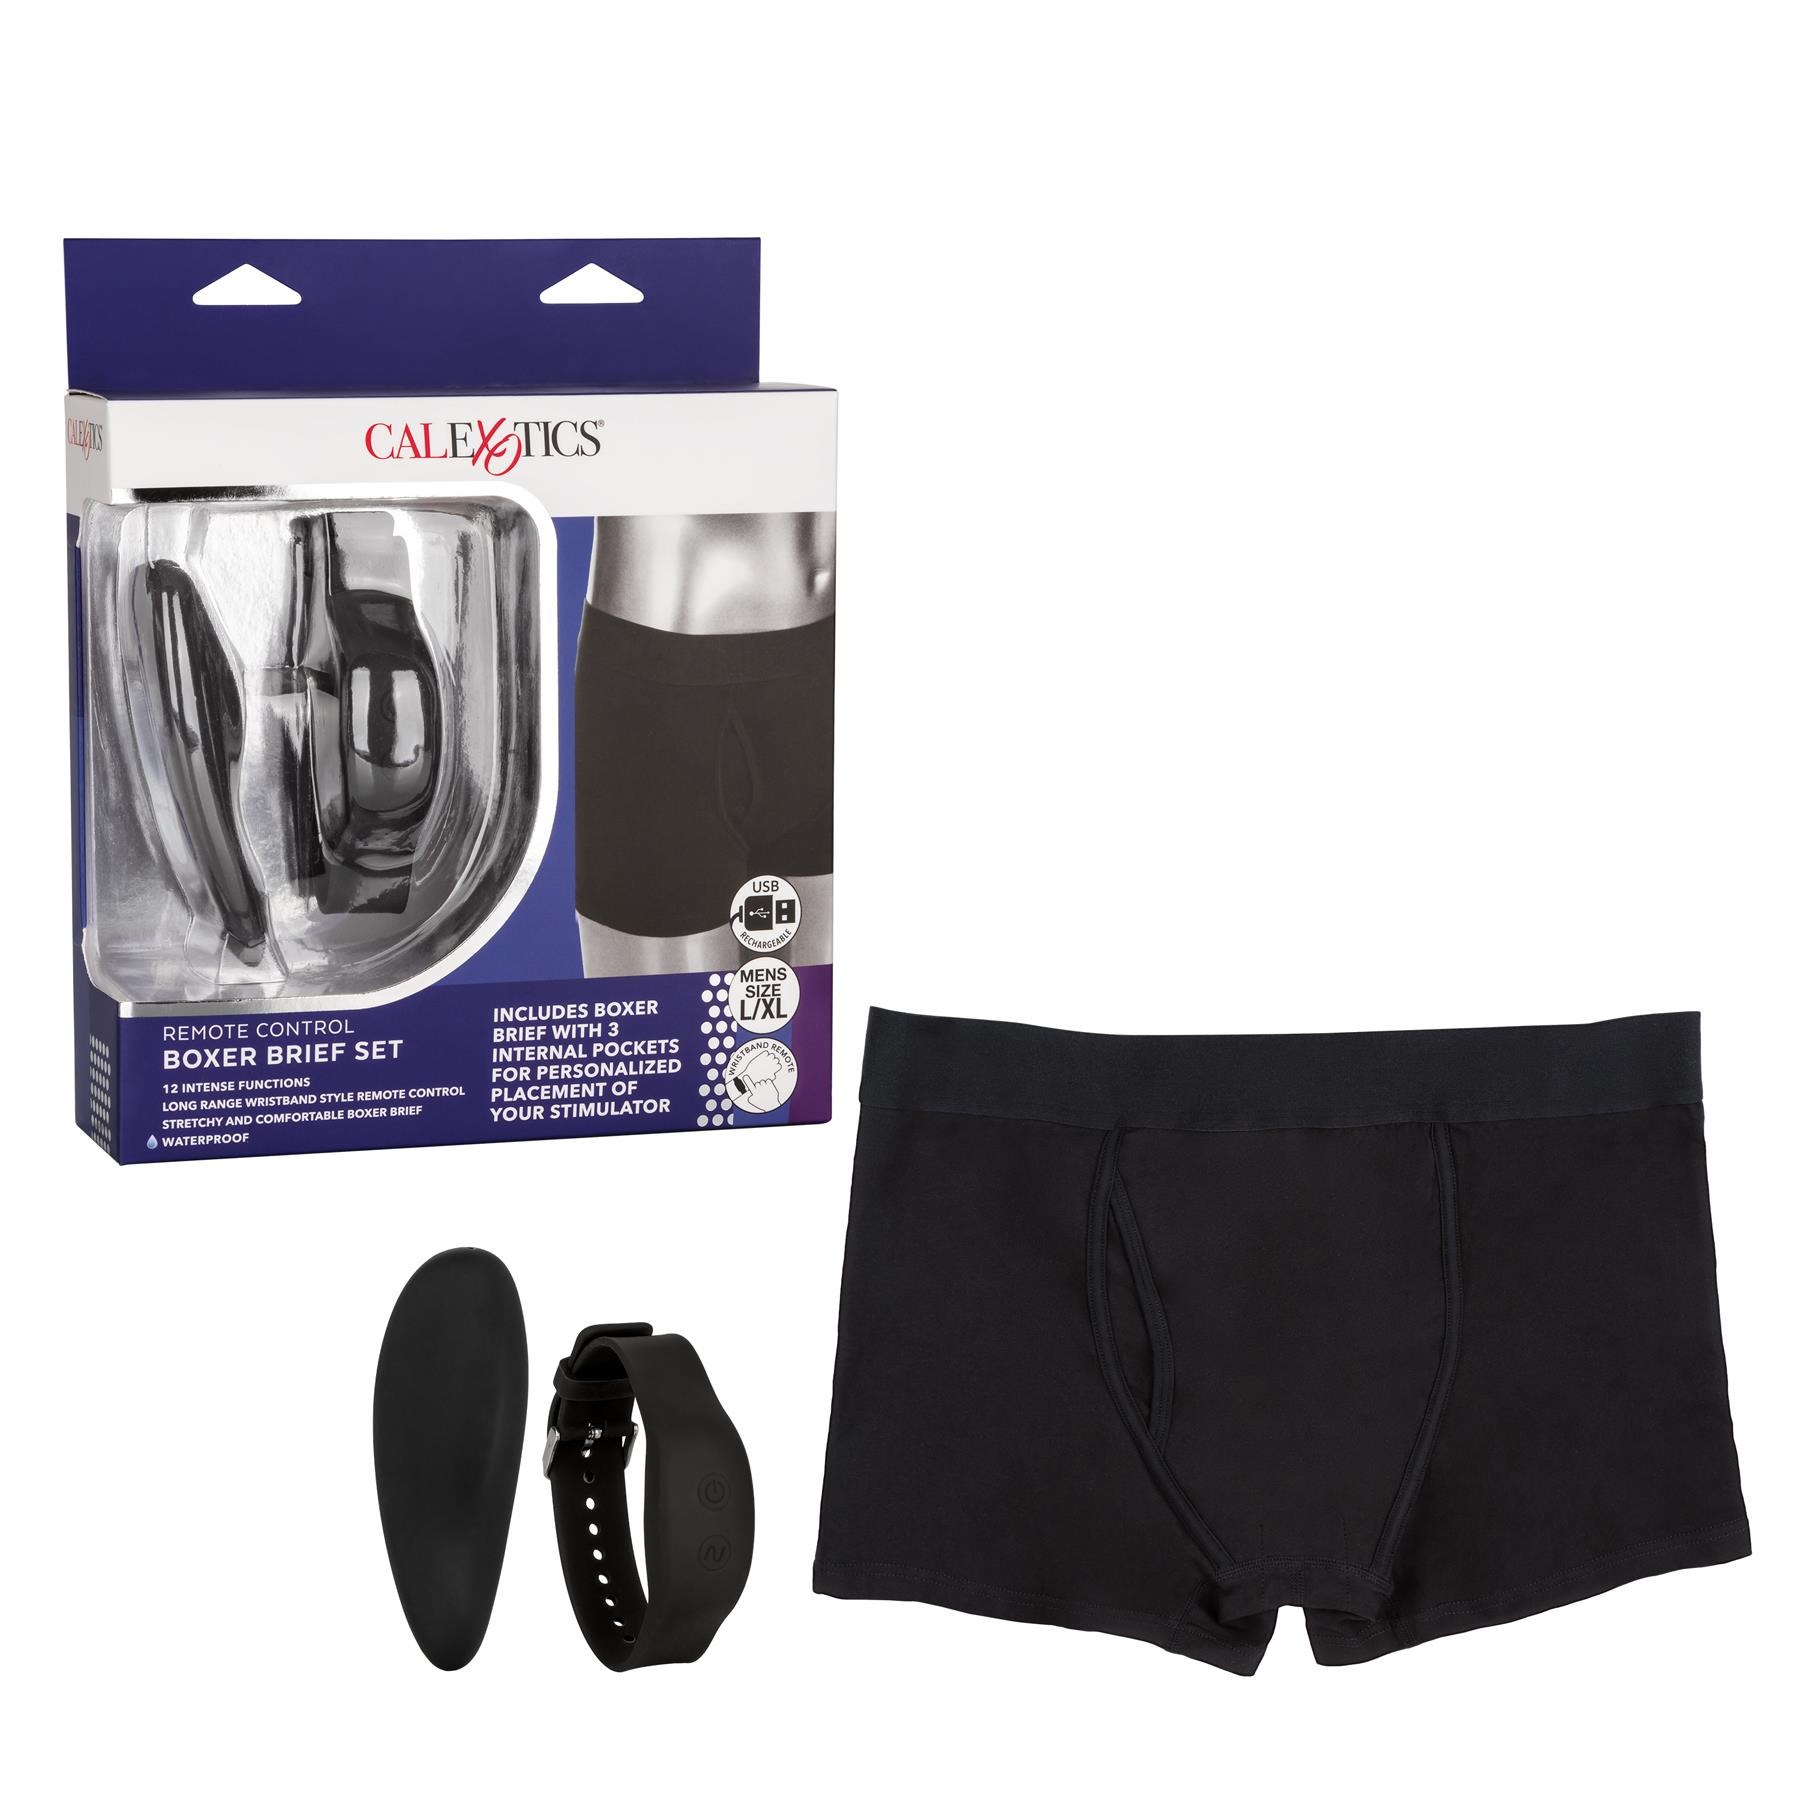 Wristband Remote Control Boxer Brief Set - Product and Packaging